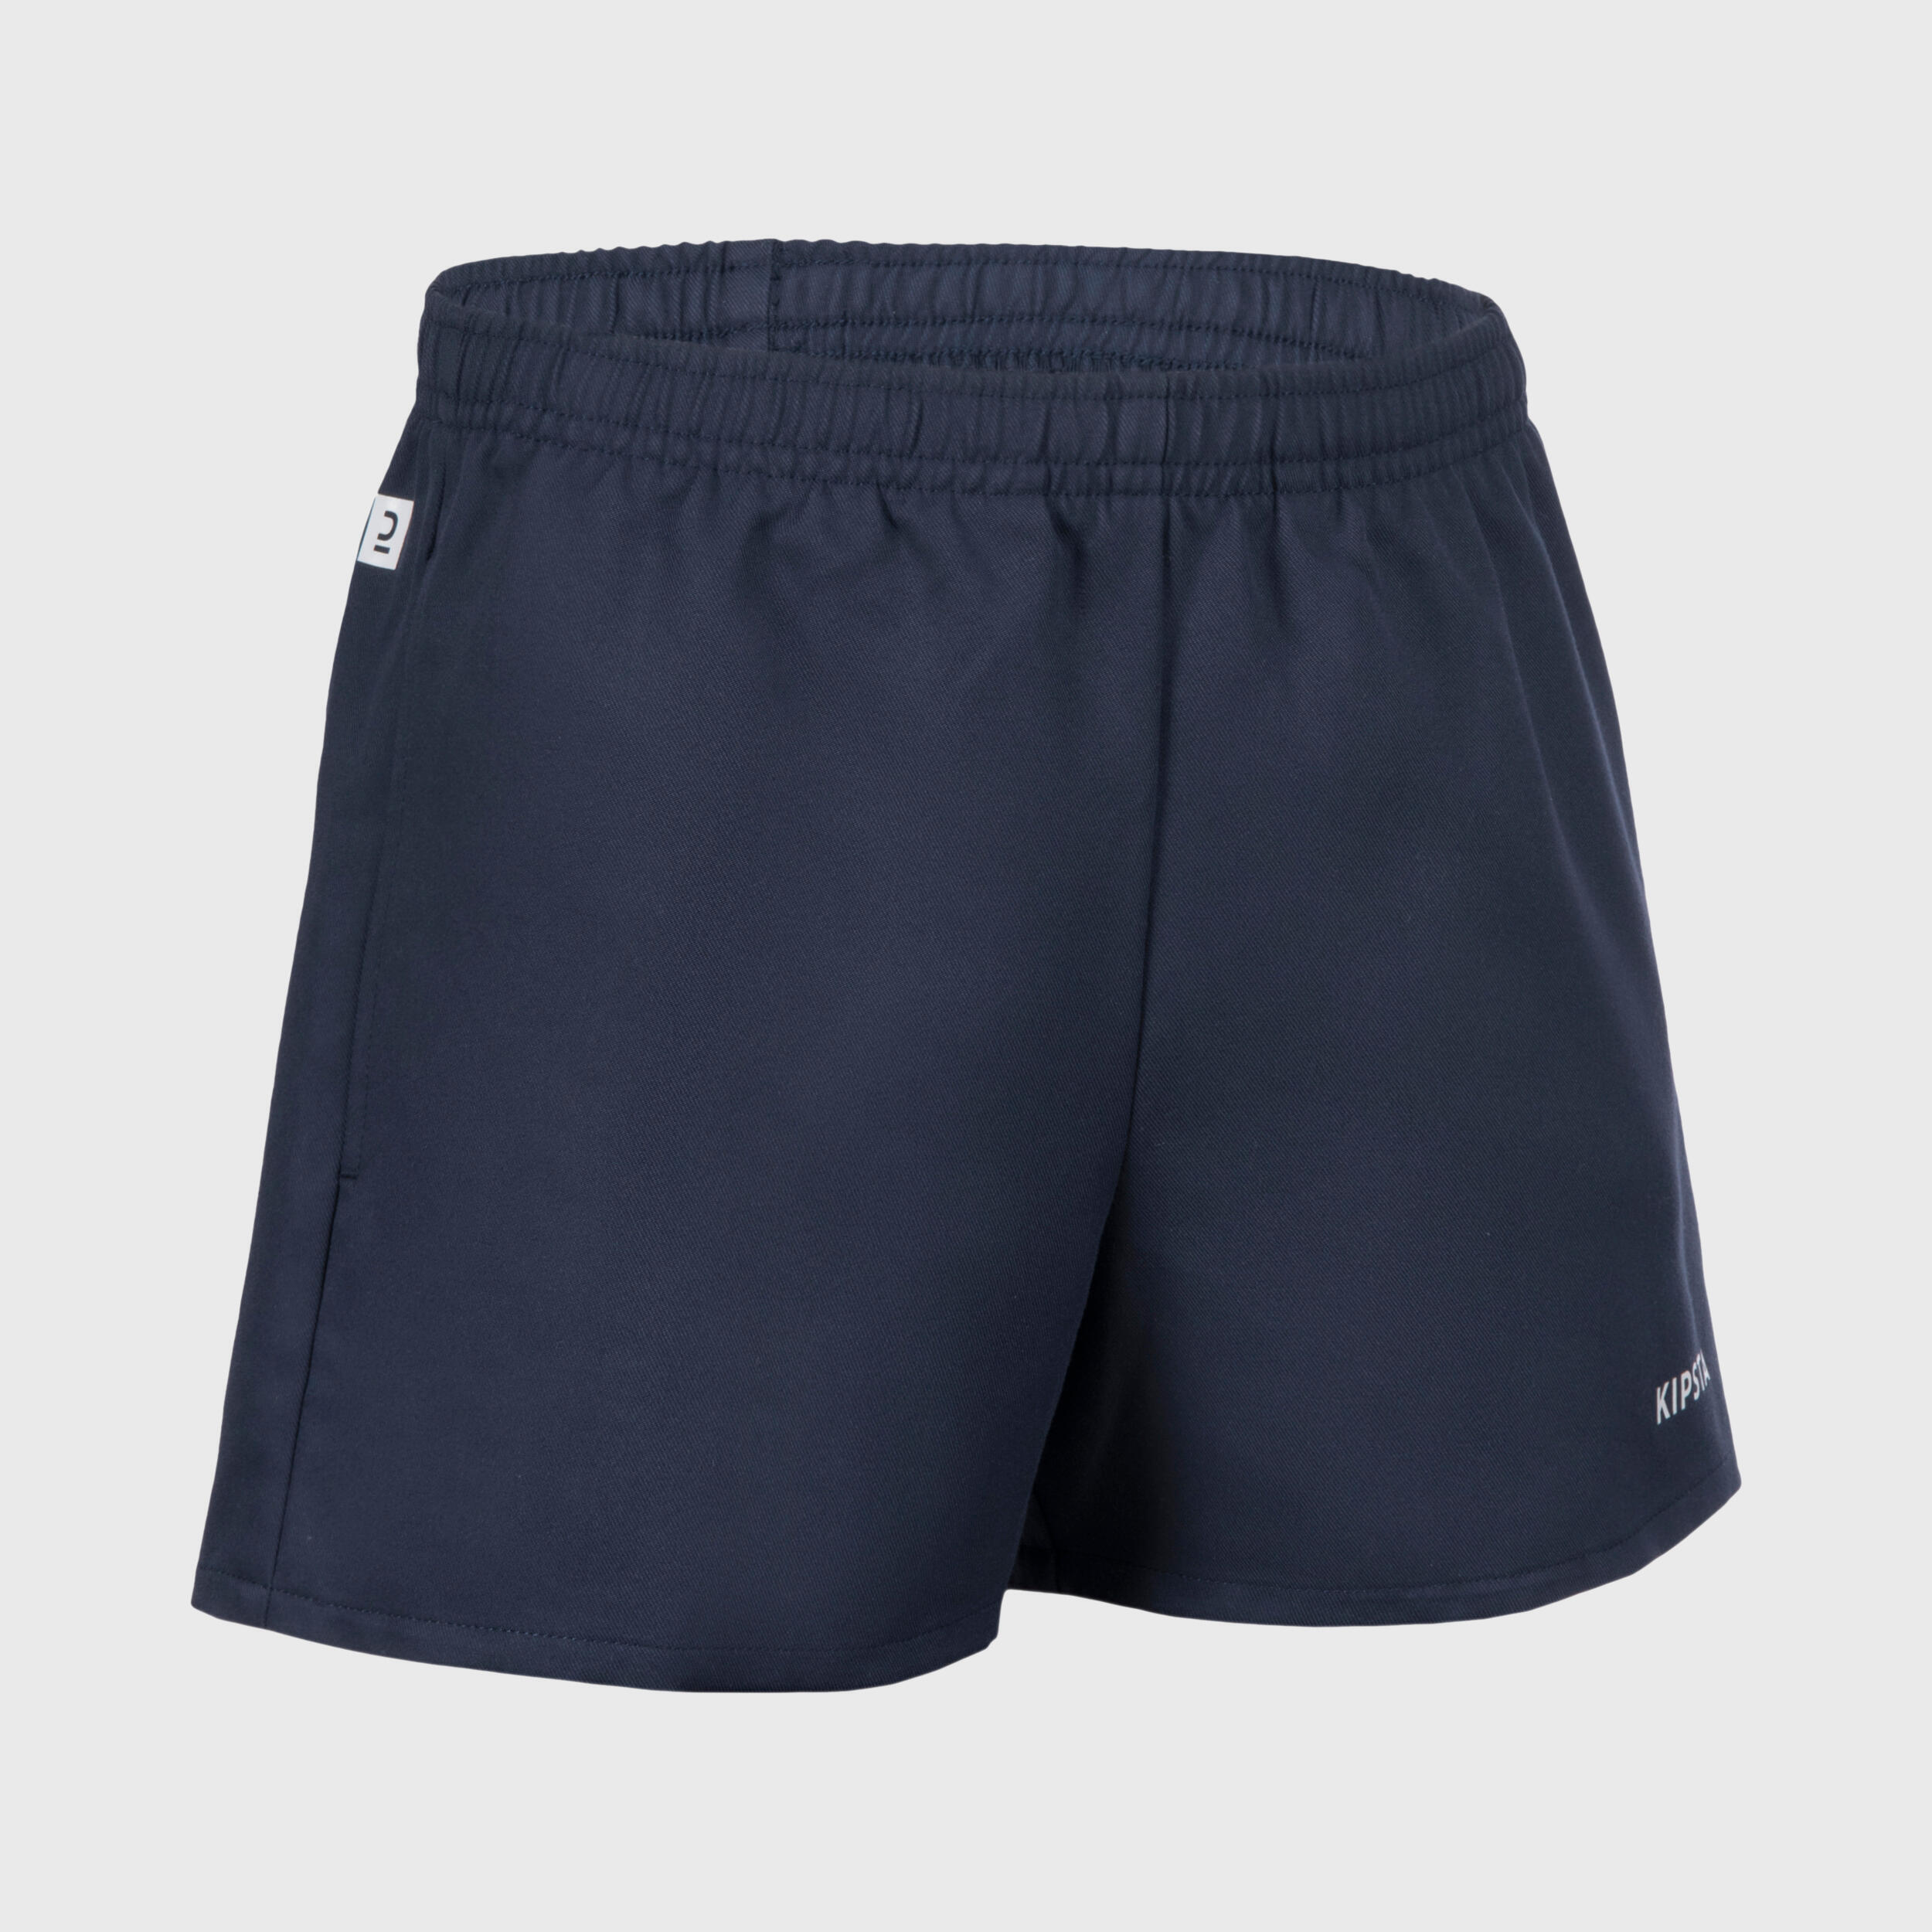 OFFLOAD Adult Rugby Shorts with Pockets R100 - Blue